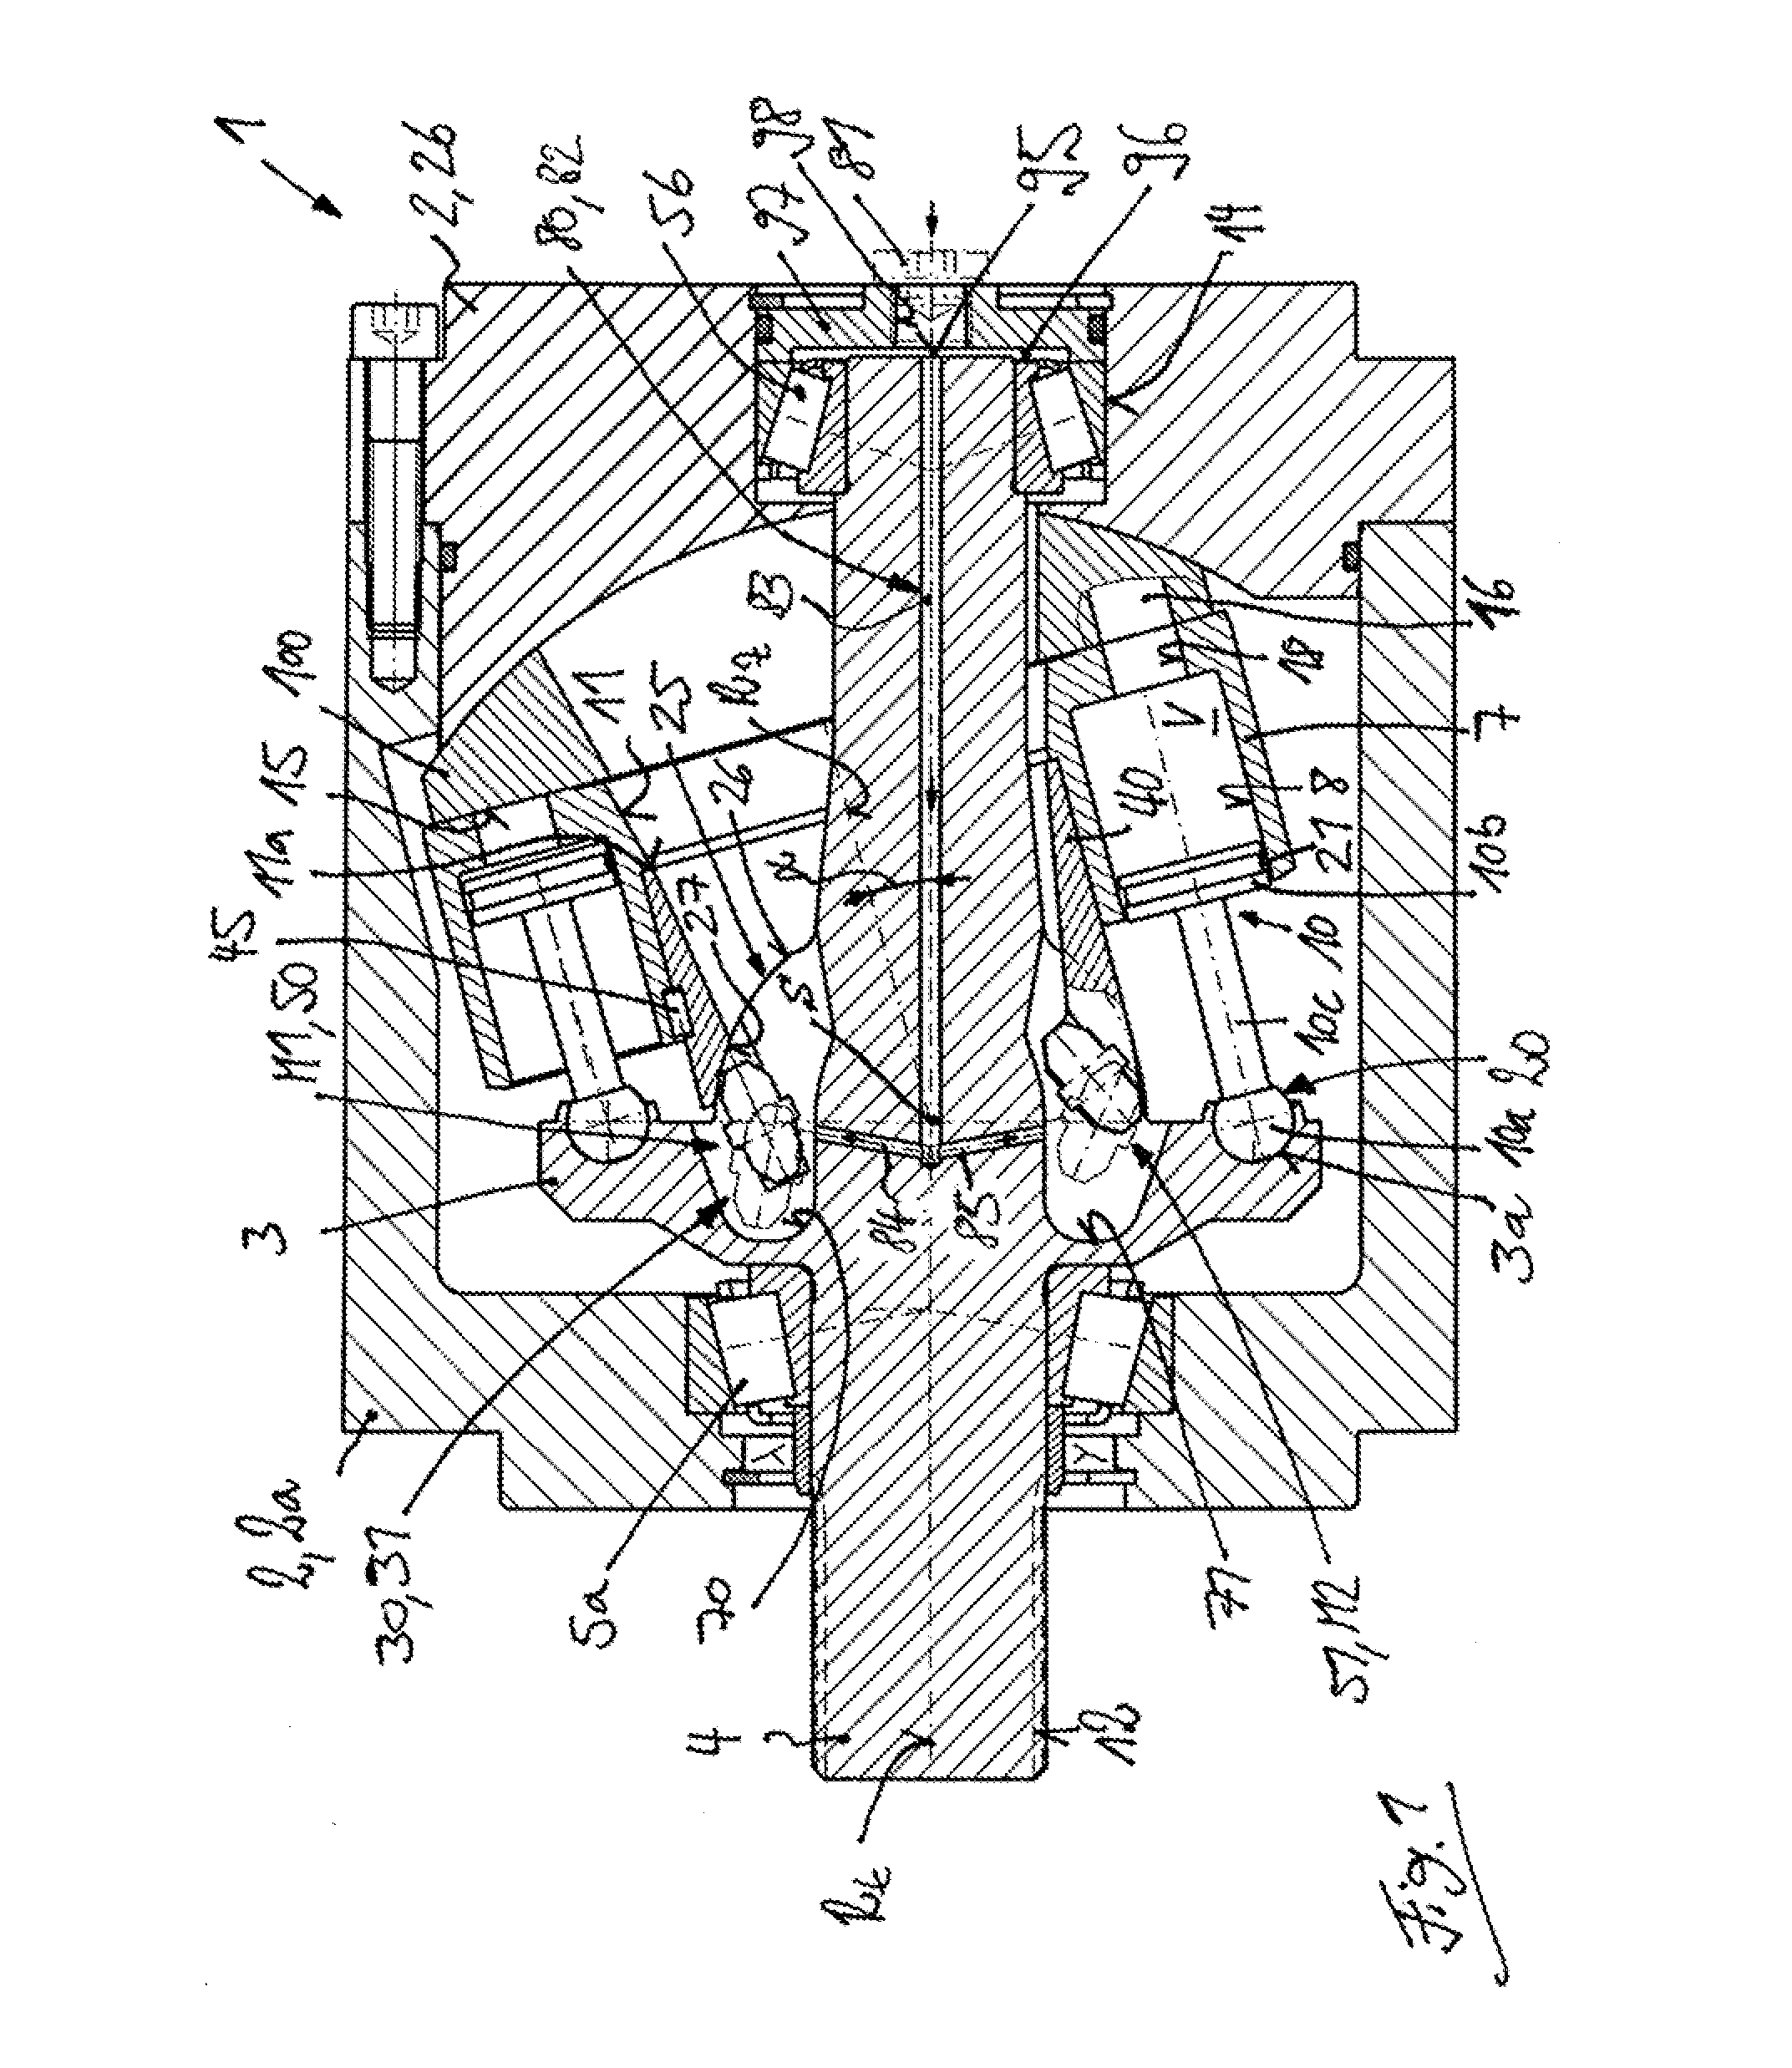 Axial Piston Machine Utilizing A Bent-Axis Construction With A Drive Joint For Driving The Cylinder Barrel